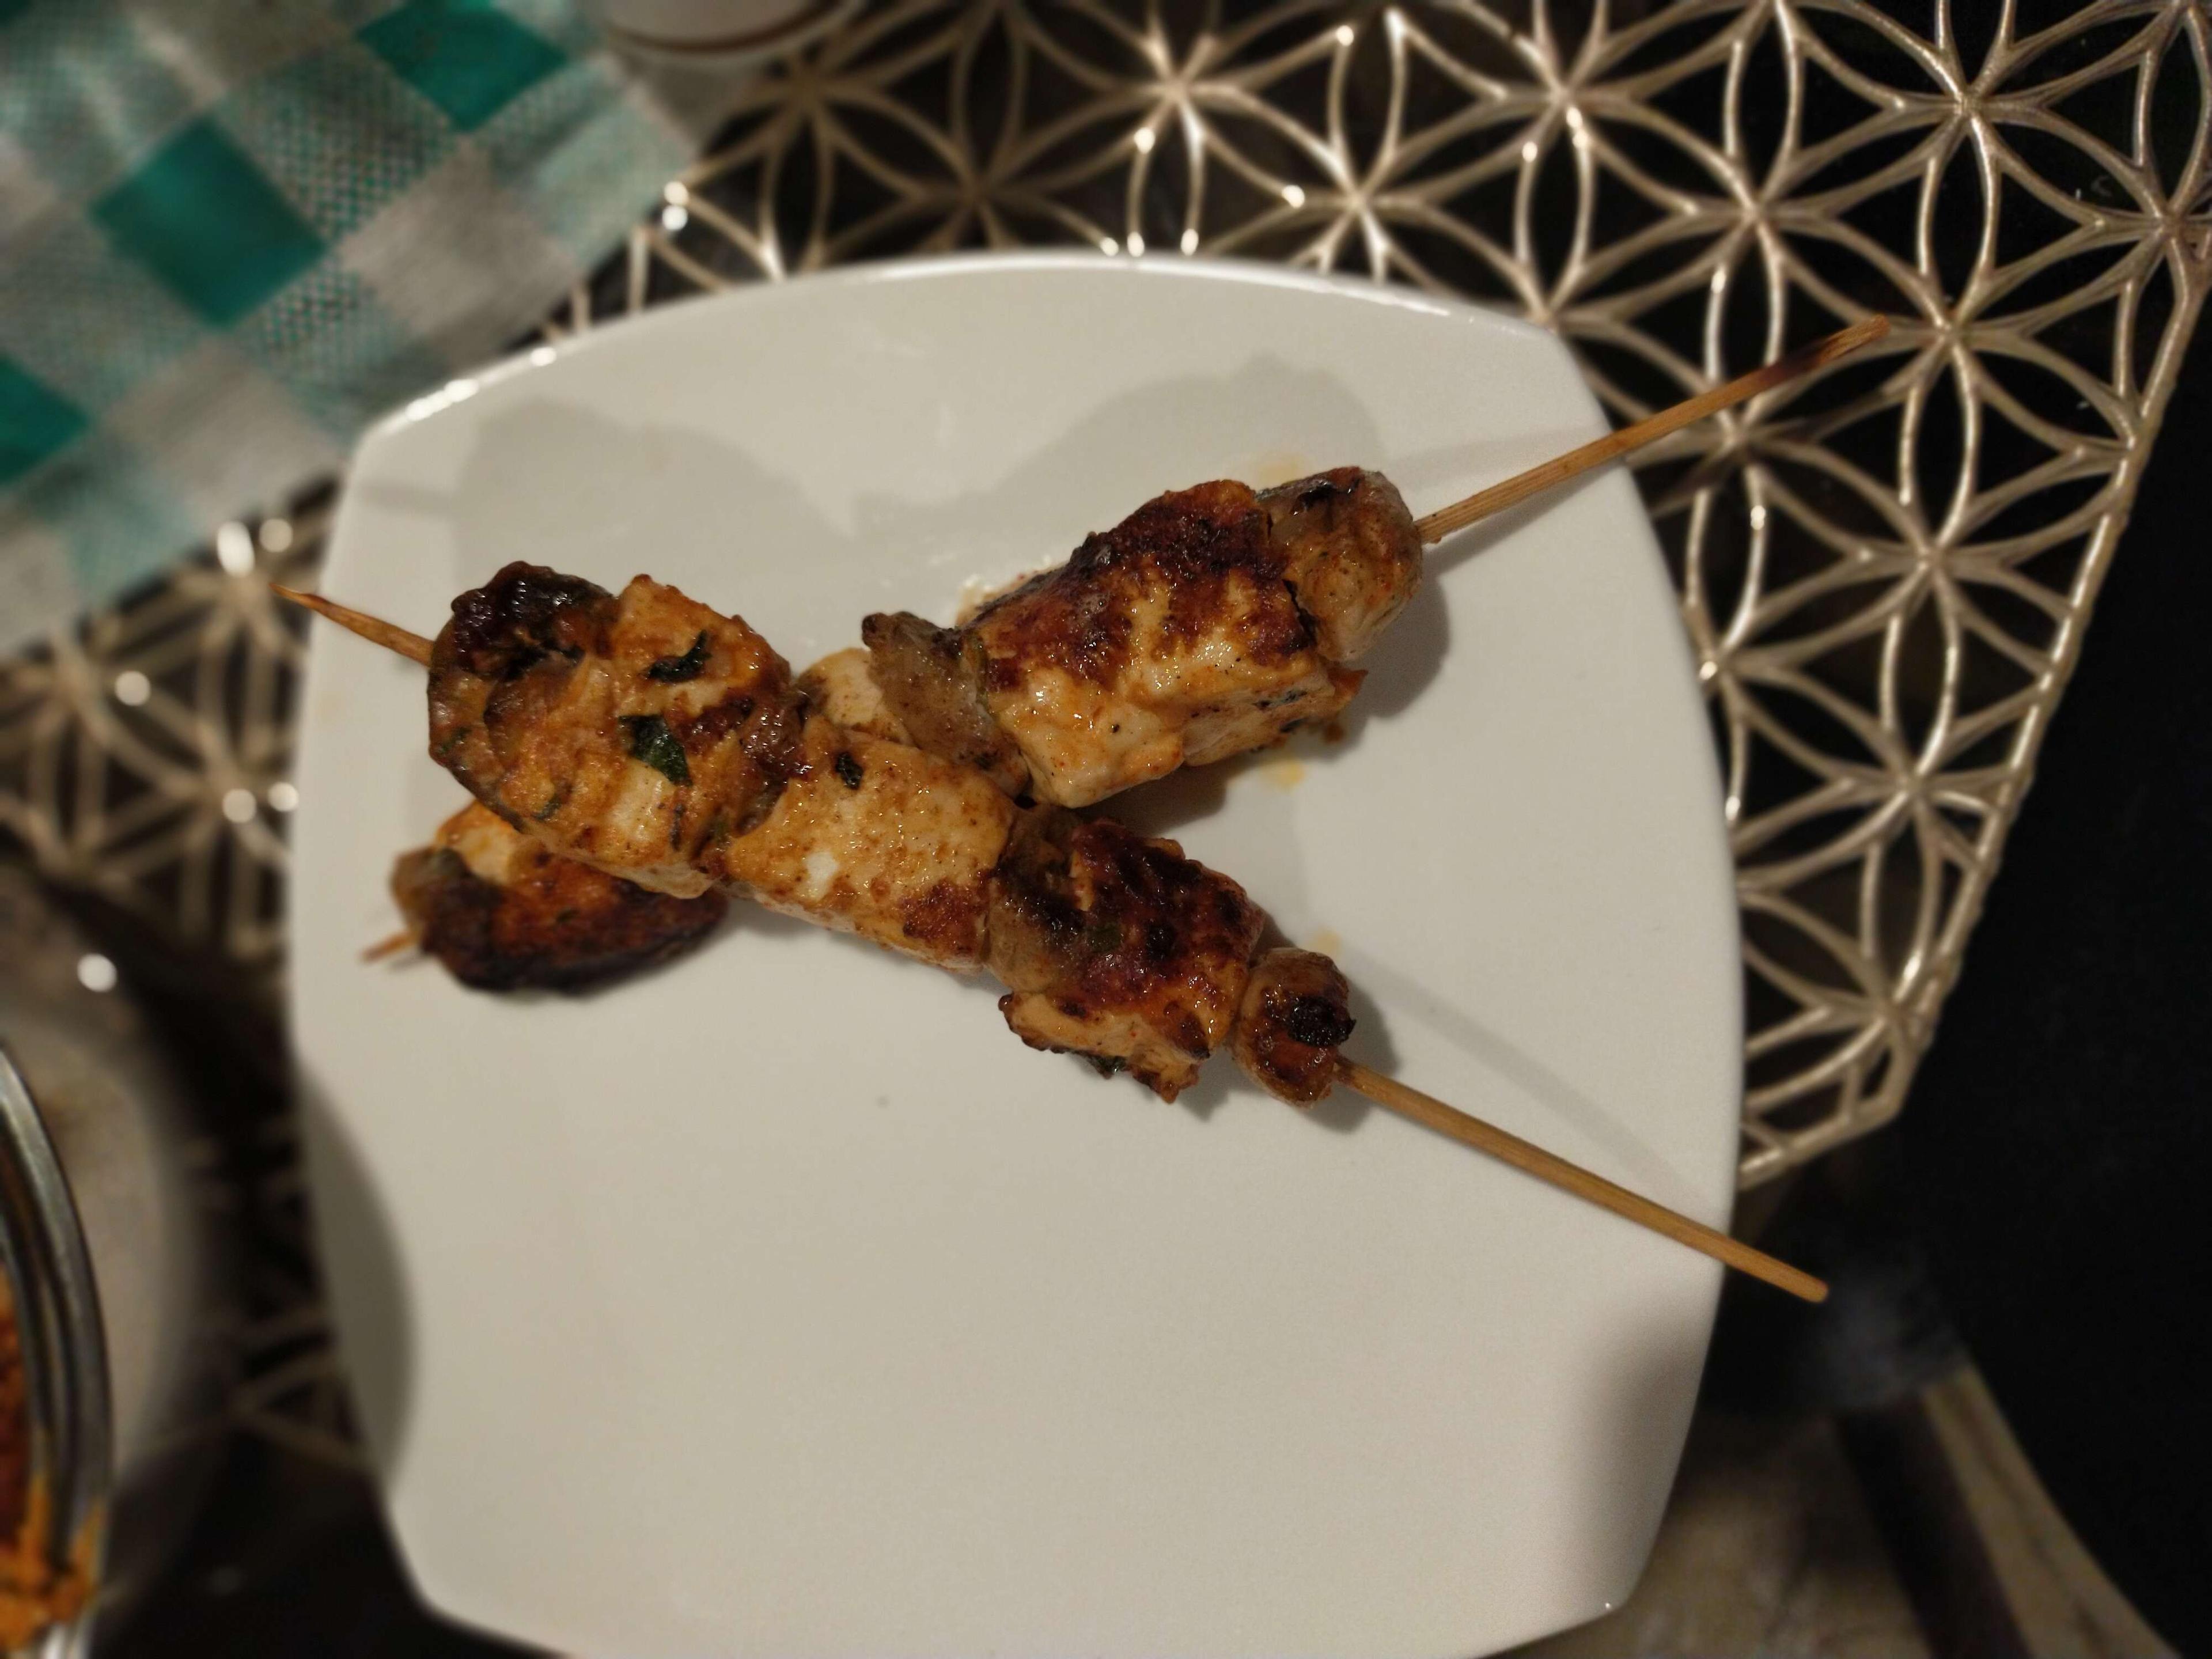 Tasty Tandoori Prawns cooked by COOX chefs cooks during occasions parties events at home